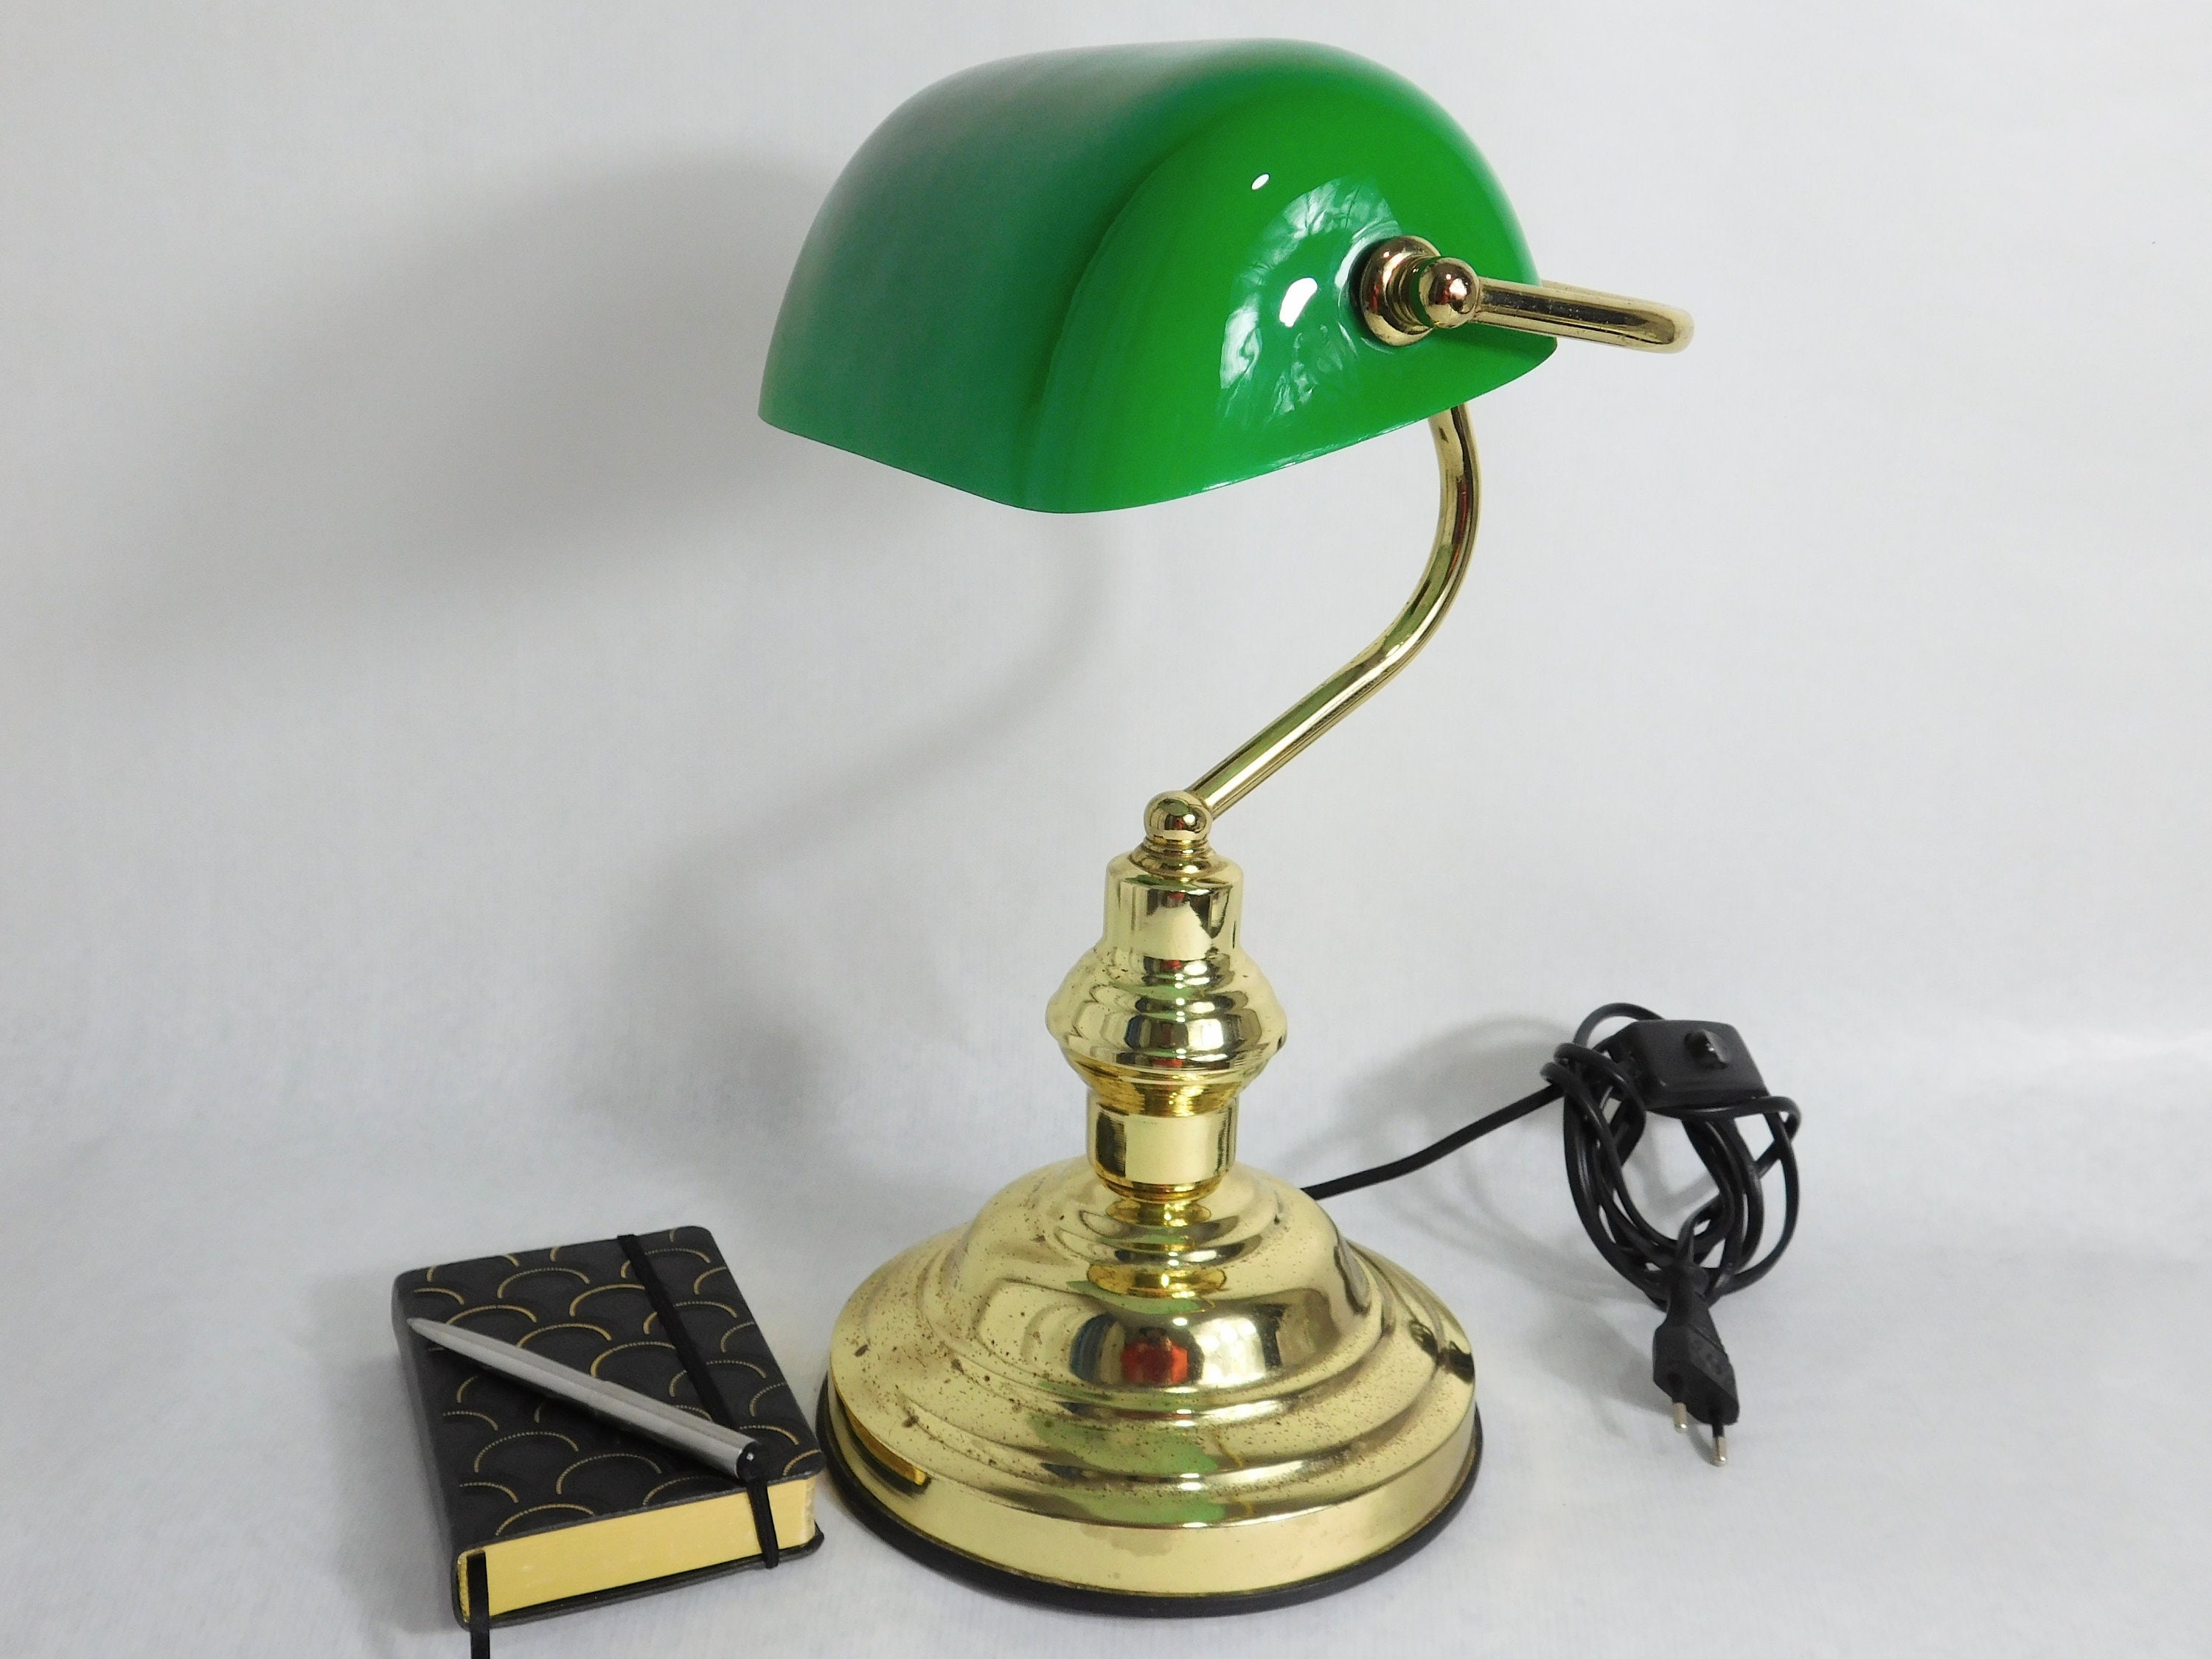 Retro Traditional Style Bankers Lamp Table lamp, Green Glass Shade Banker's  Desk Lamp for Living Room Office Study Reading Metal Desk lamp  (Color:Brass), Desk Lamps -  Canada